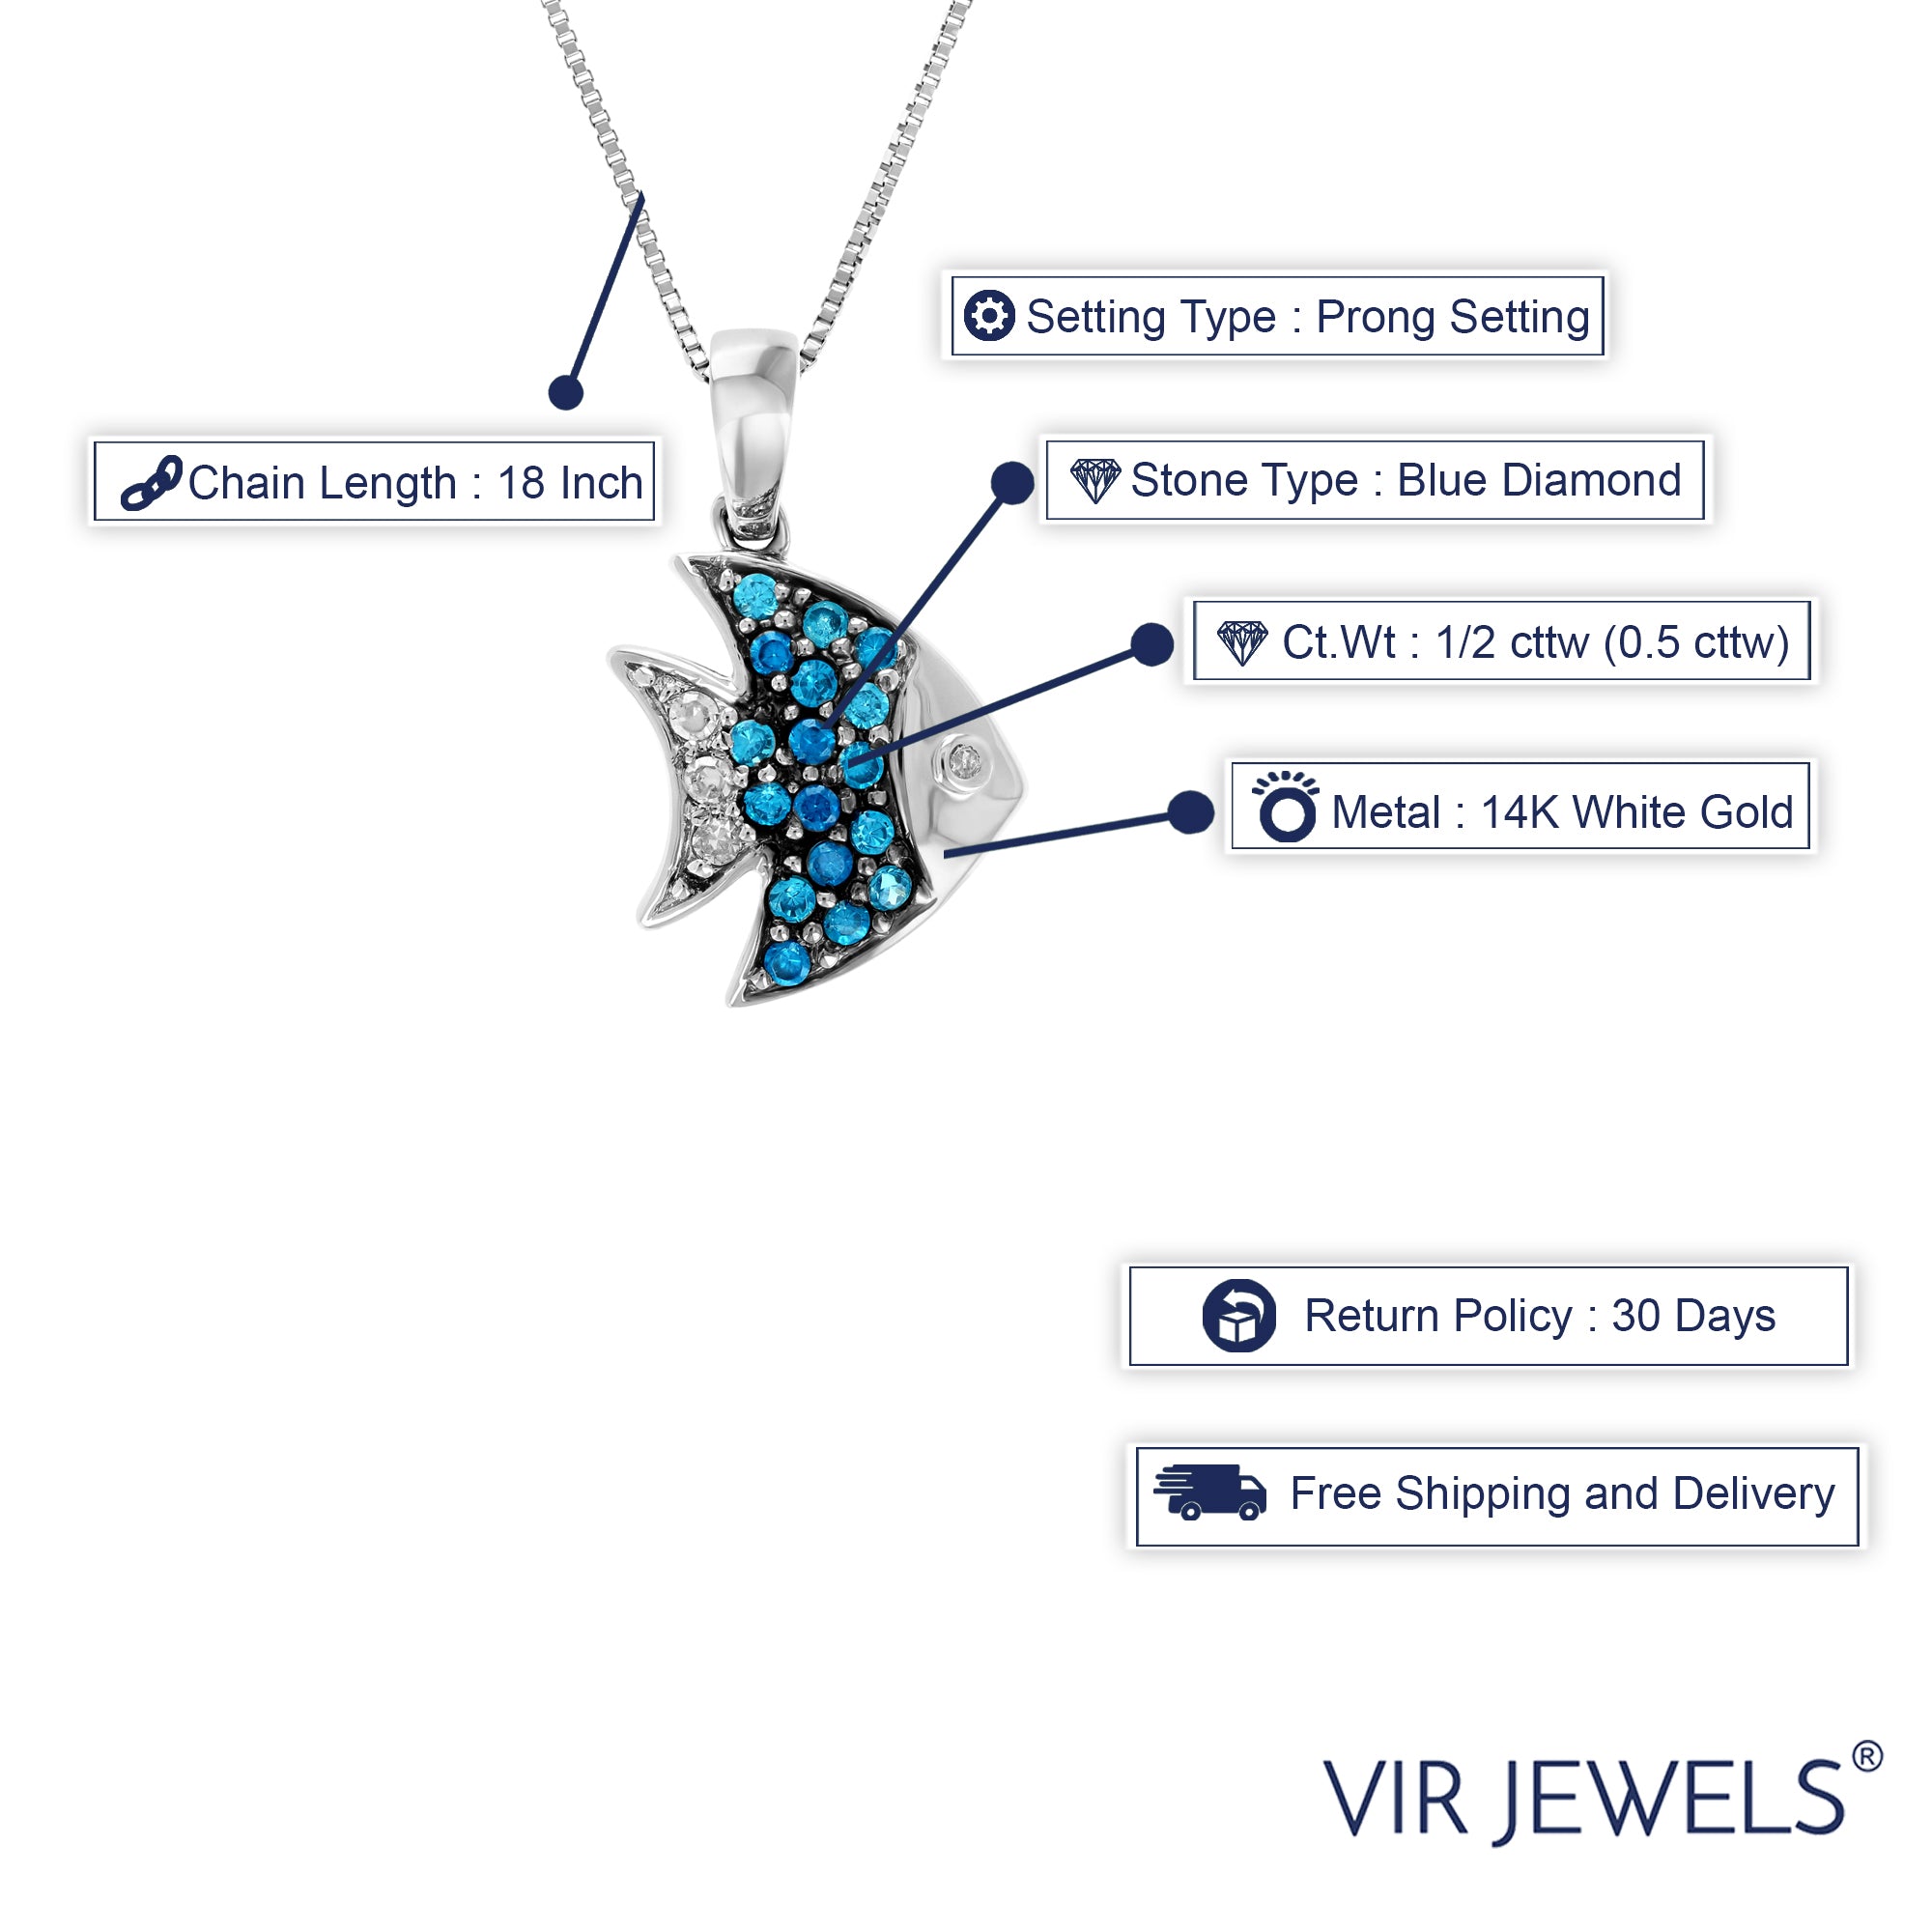 1/2 cttw Blue Diamond Fish Pendant Necklace 14K White Gold with 18 Inch Chain